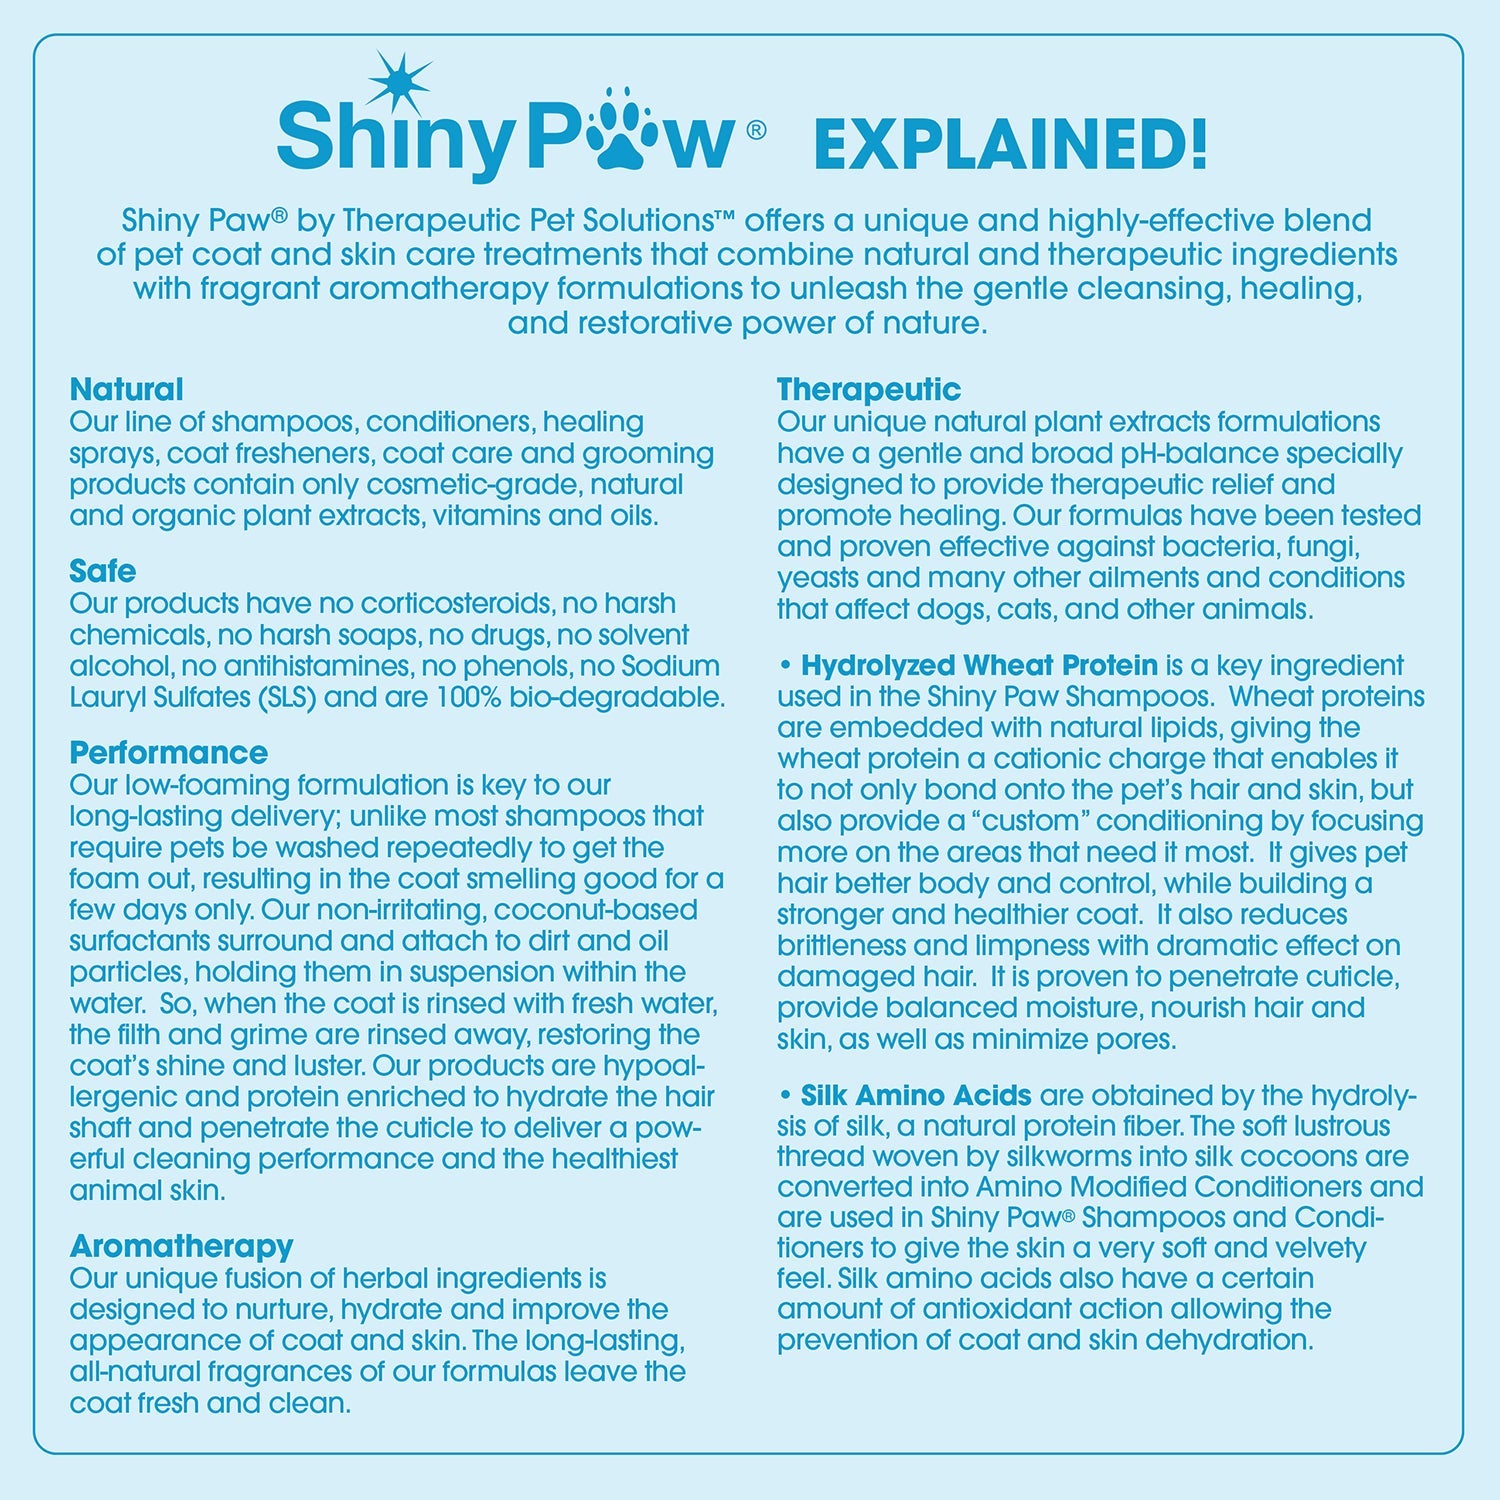 Shiny Paw Natural Glo Whitening Shampoo for Dogs